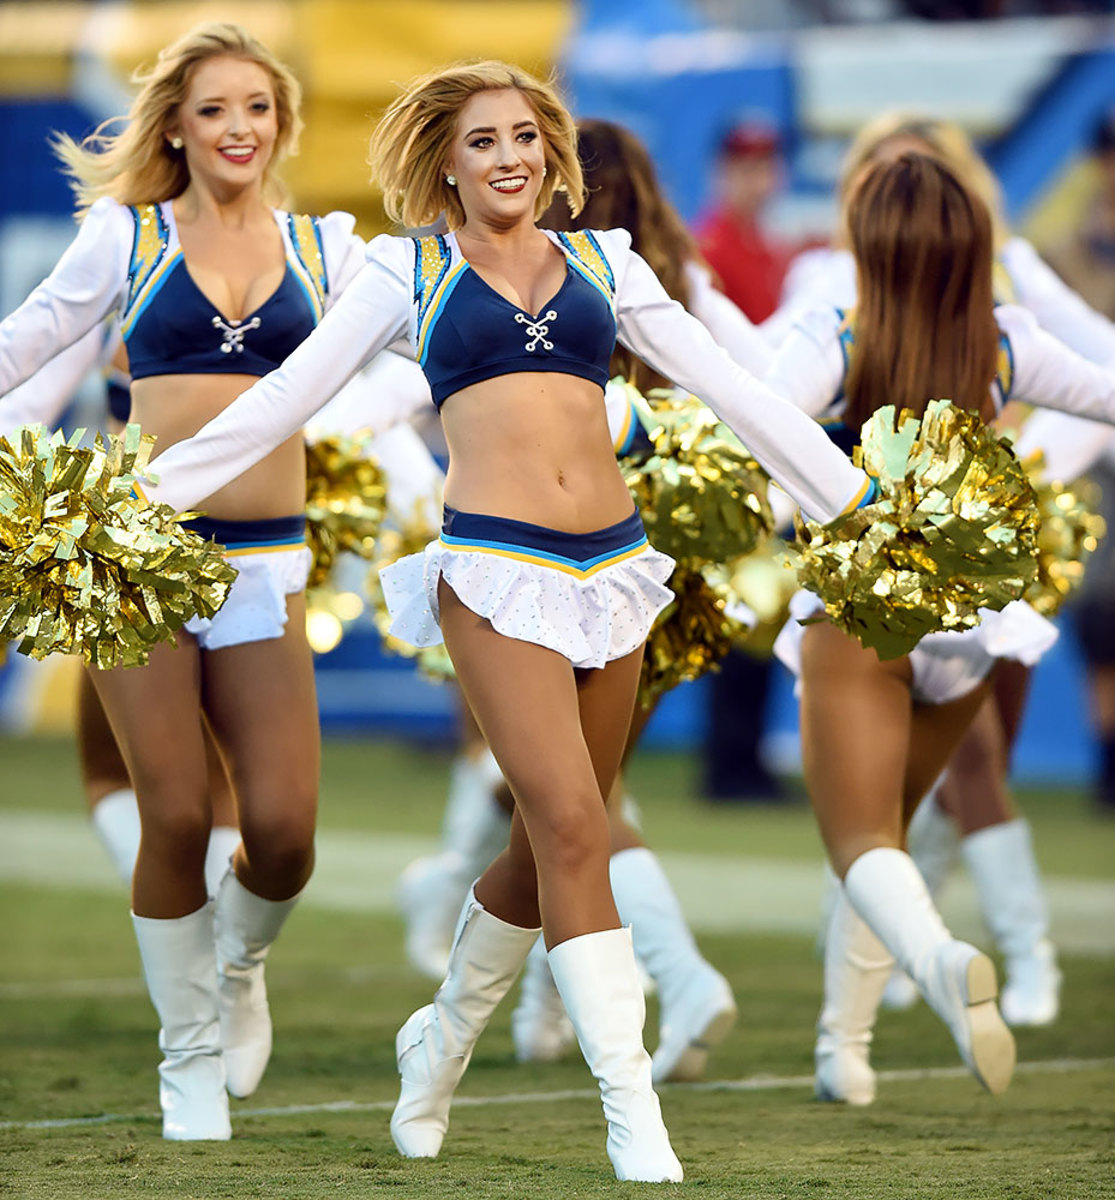 San-Diego-Chargers-cheerleaders-0071608196563_Cardinals_at_Chargers.jpg